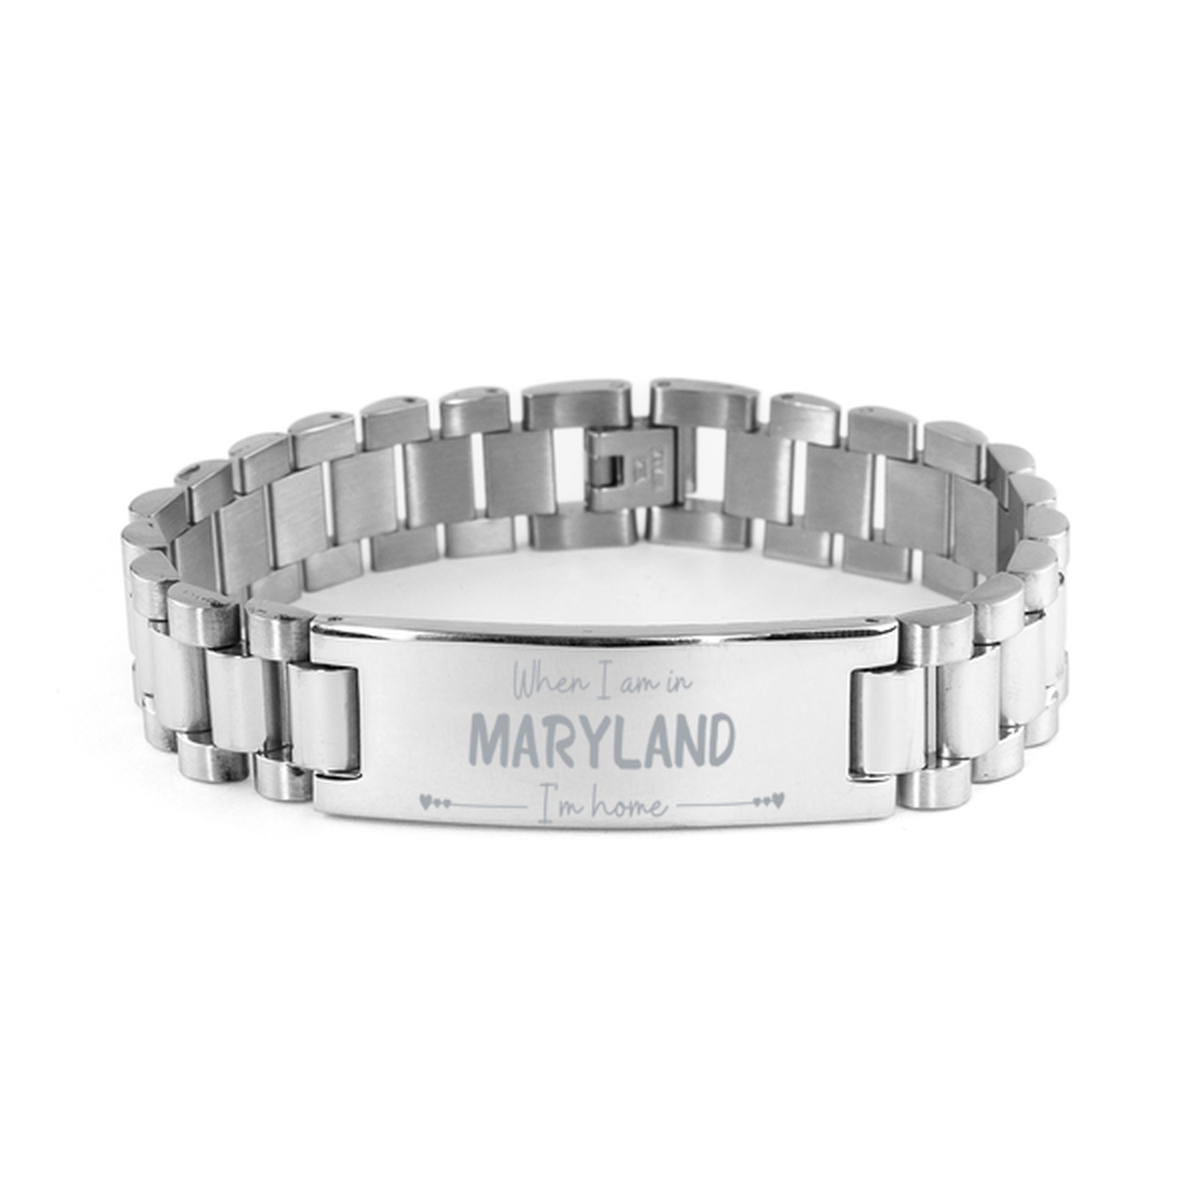 When I am in Maryland I'm home Ladder Stainless Steel Bracelet, Cheap Gifts For Maryland, State Maryland Birthday Gifts for Friends Coworker